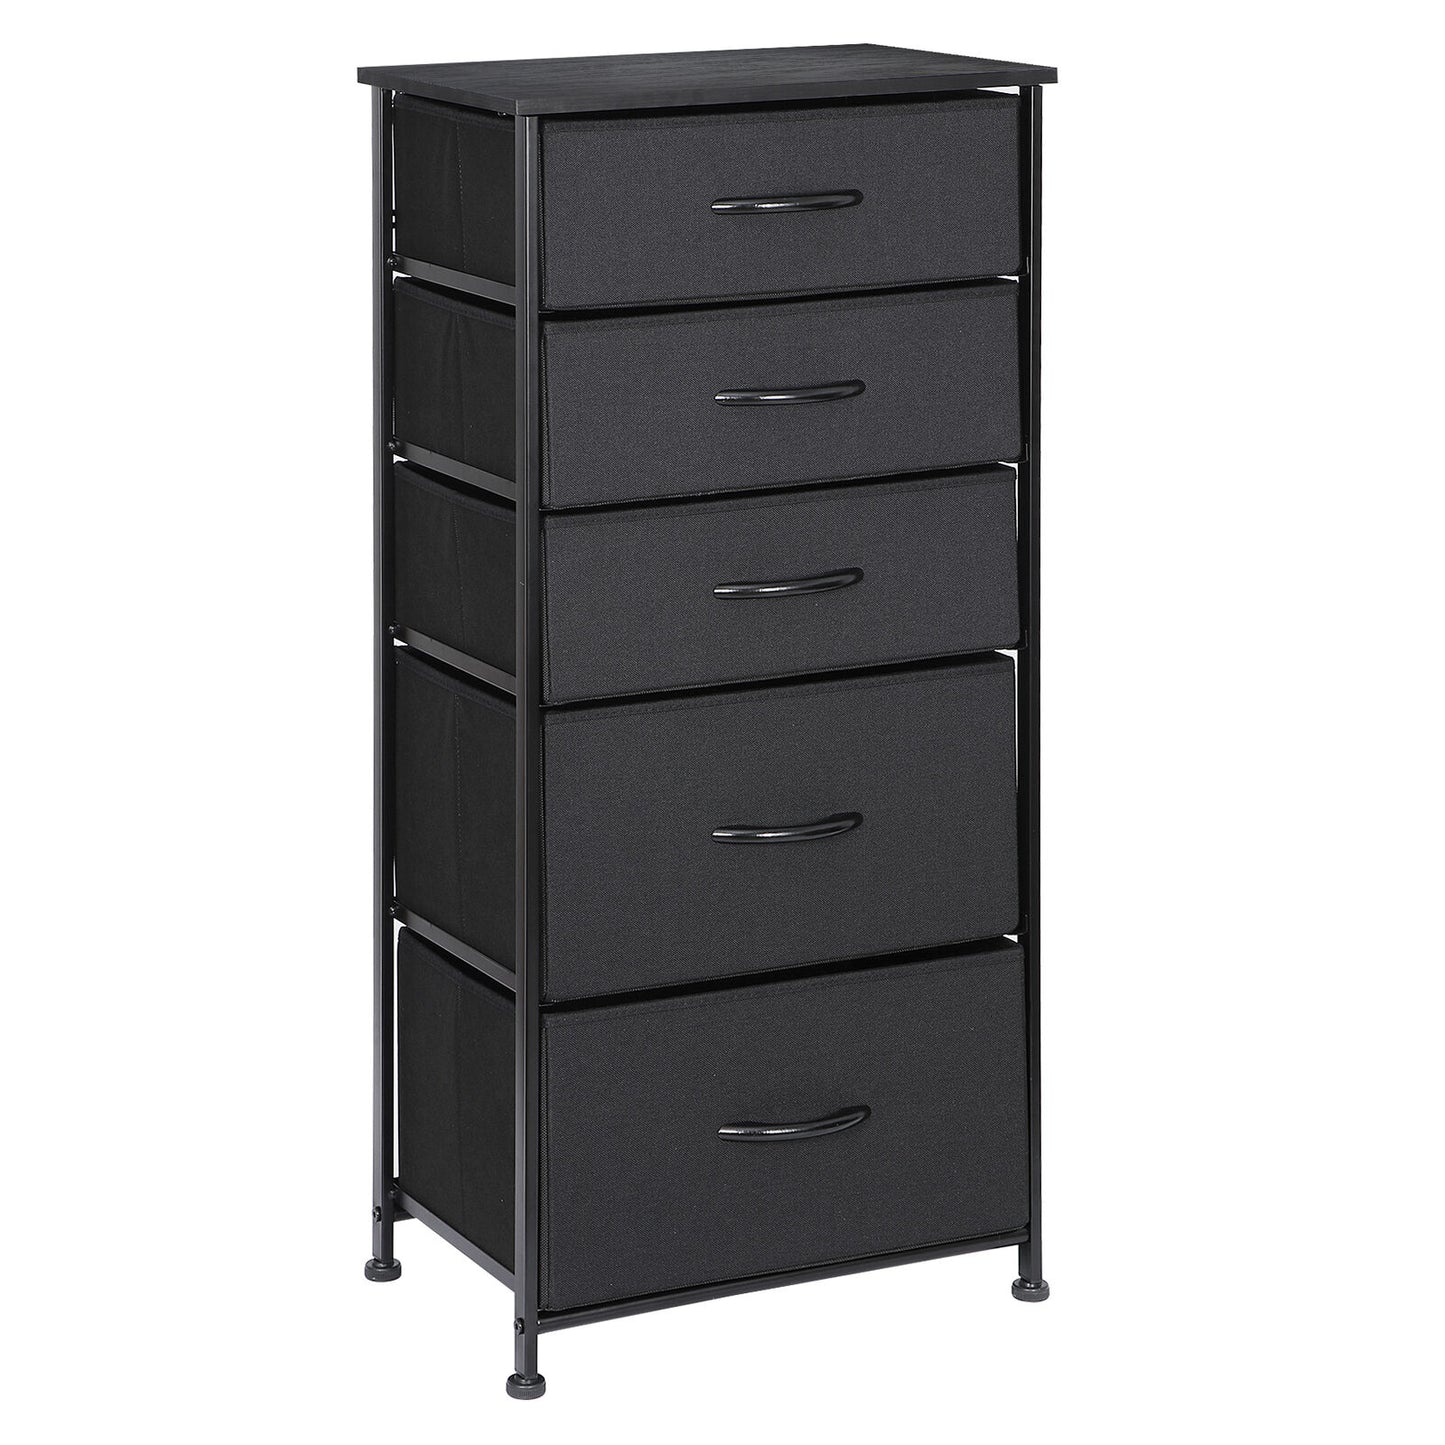 Dresser with 5 Drawers Fabric Storage Tower Organizer Unit for Bedroom Grey